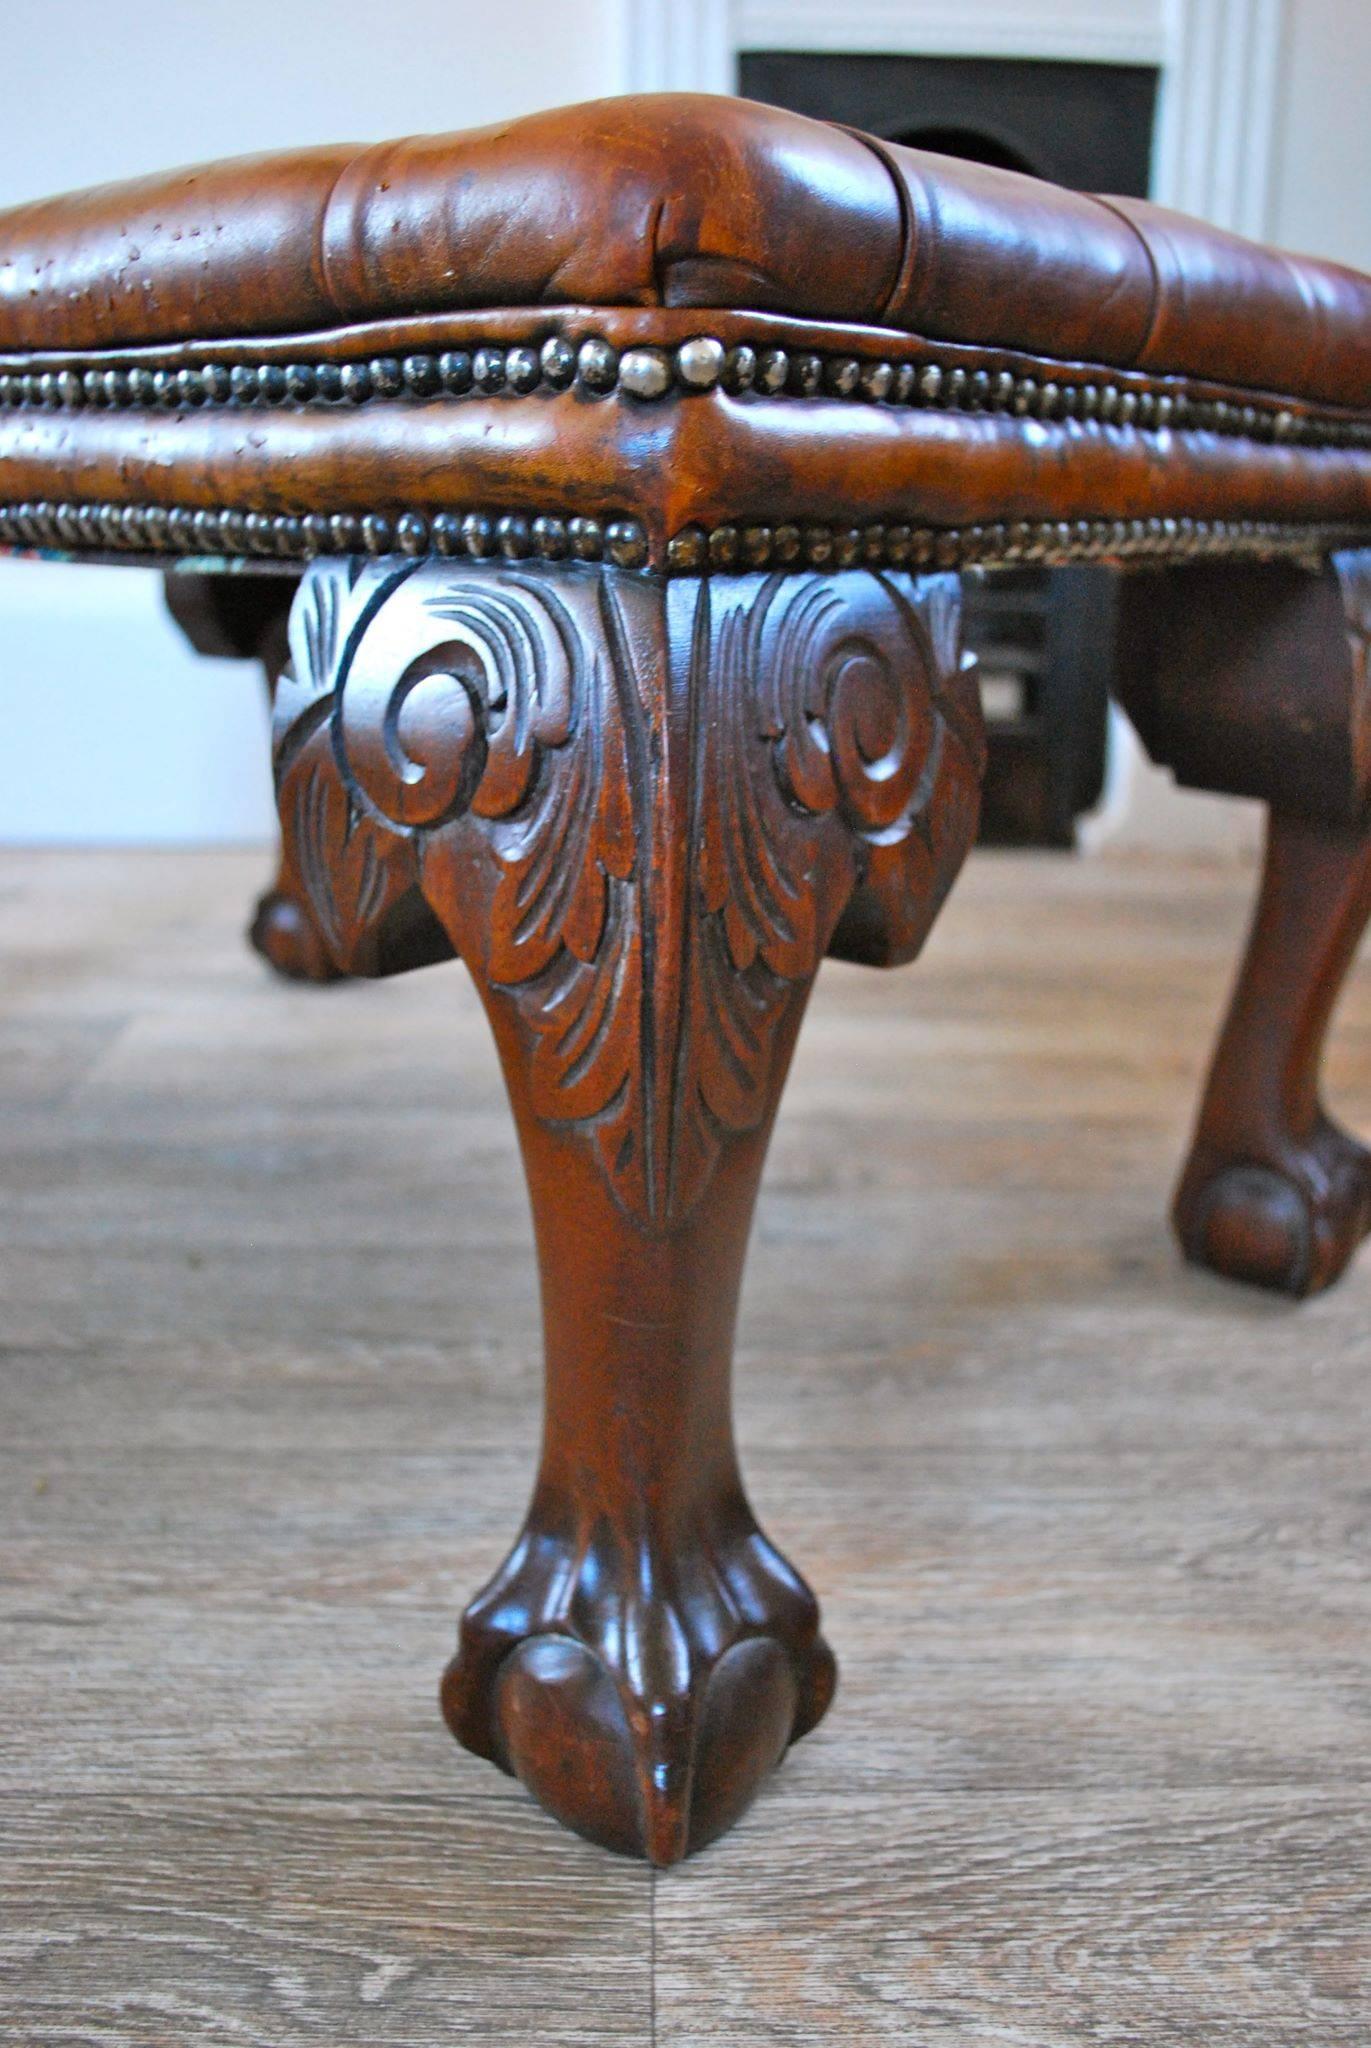 A large 19th century deep buttoned leather foot stool.
This stool consist of a deep buttoned leather top with two rows brass dome-head nails standing on four heavy carved legs leading down to ball and claw feet.